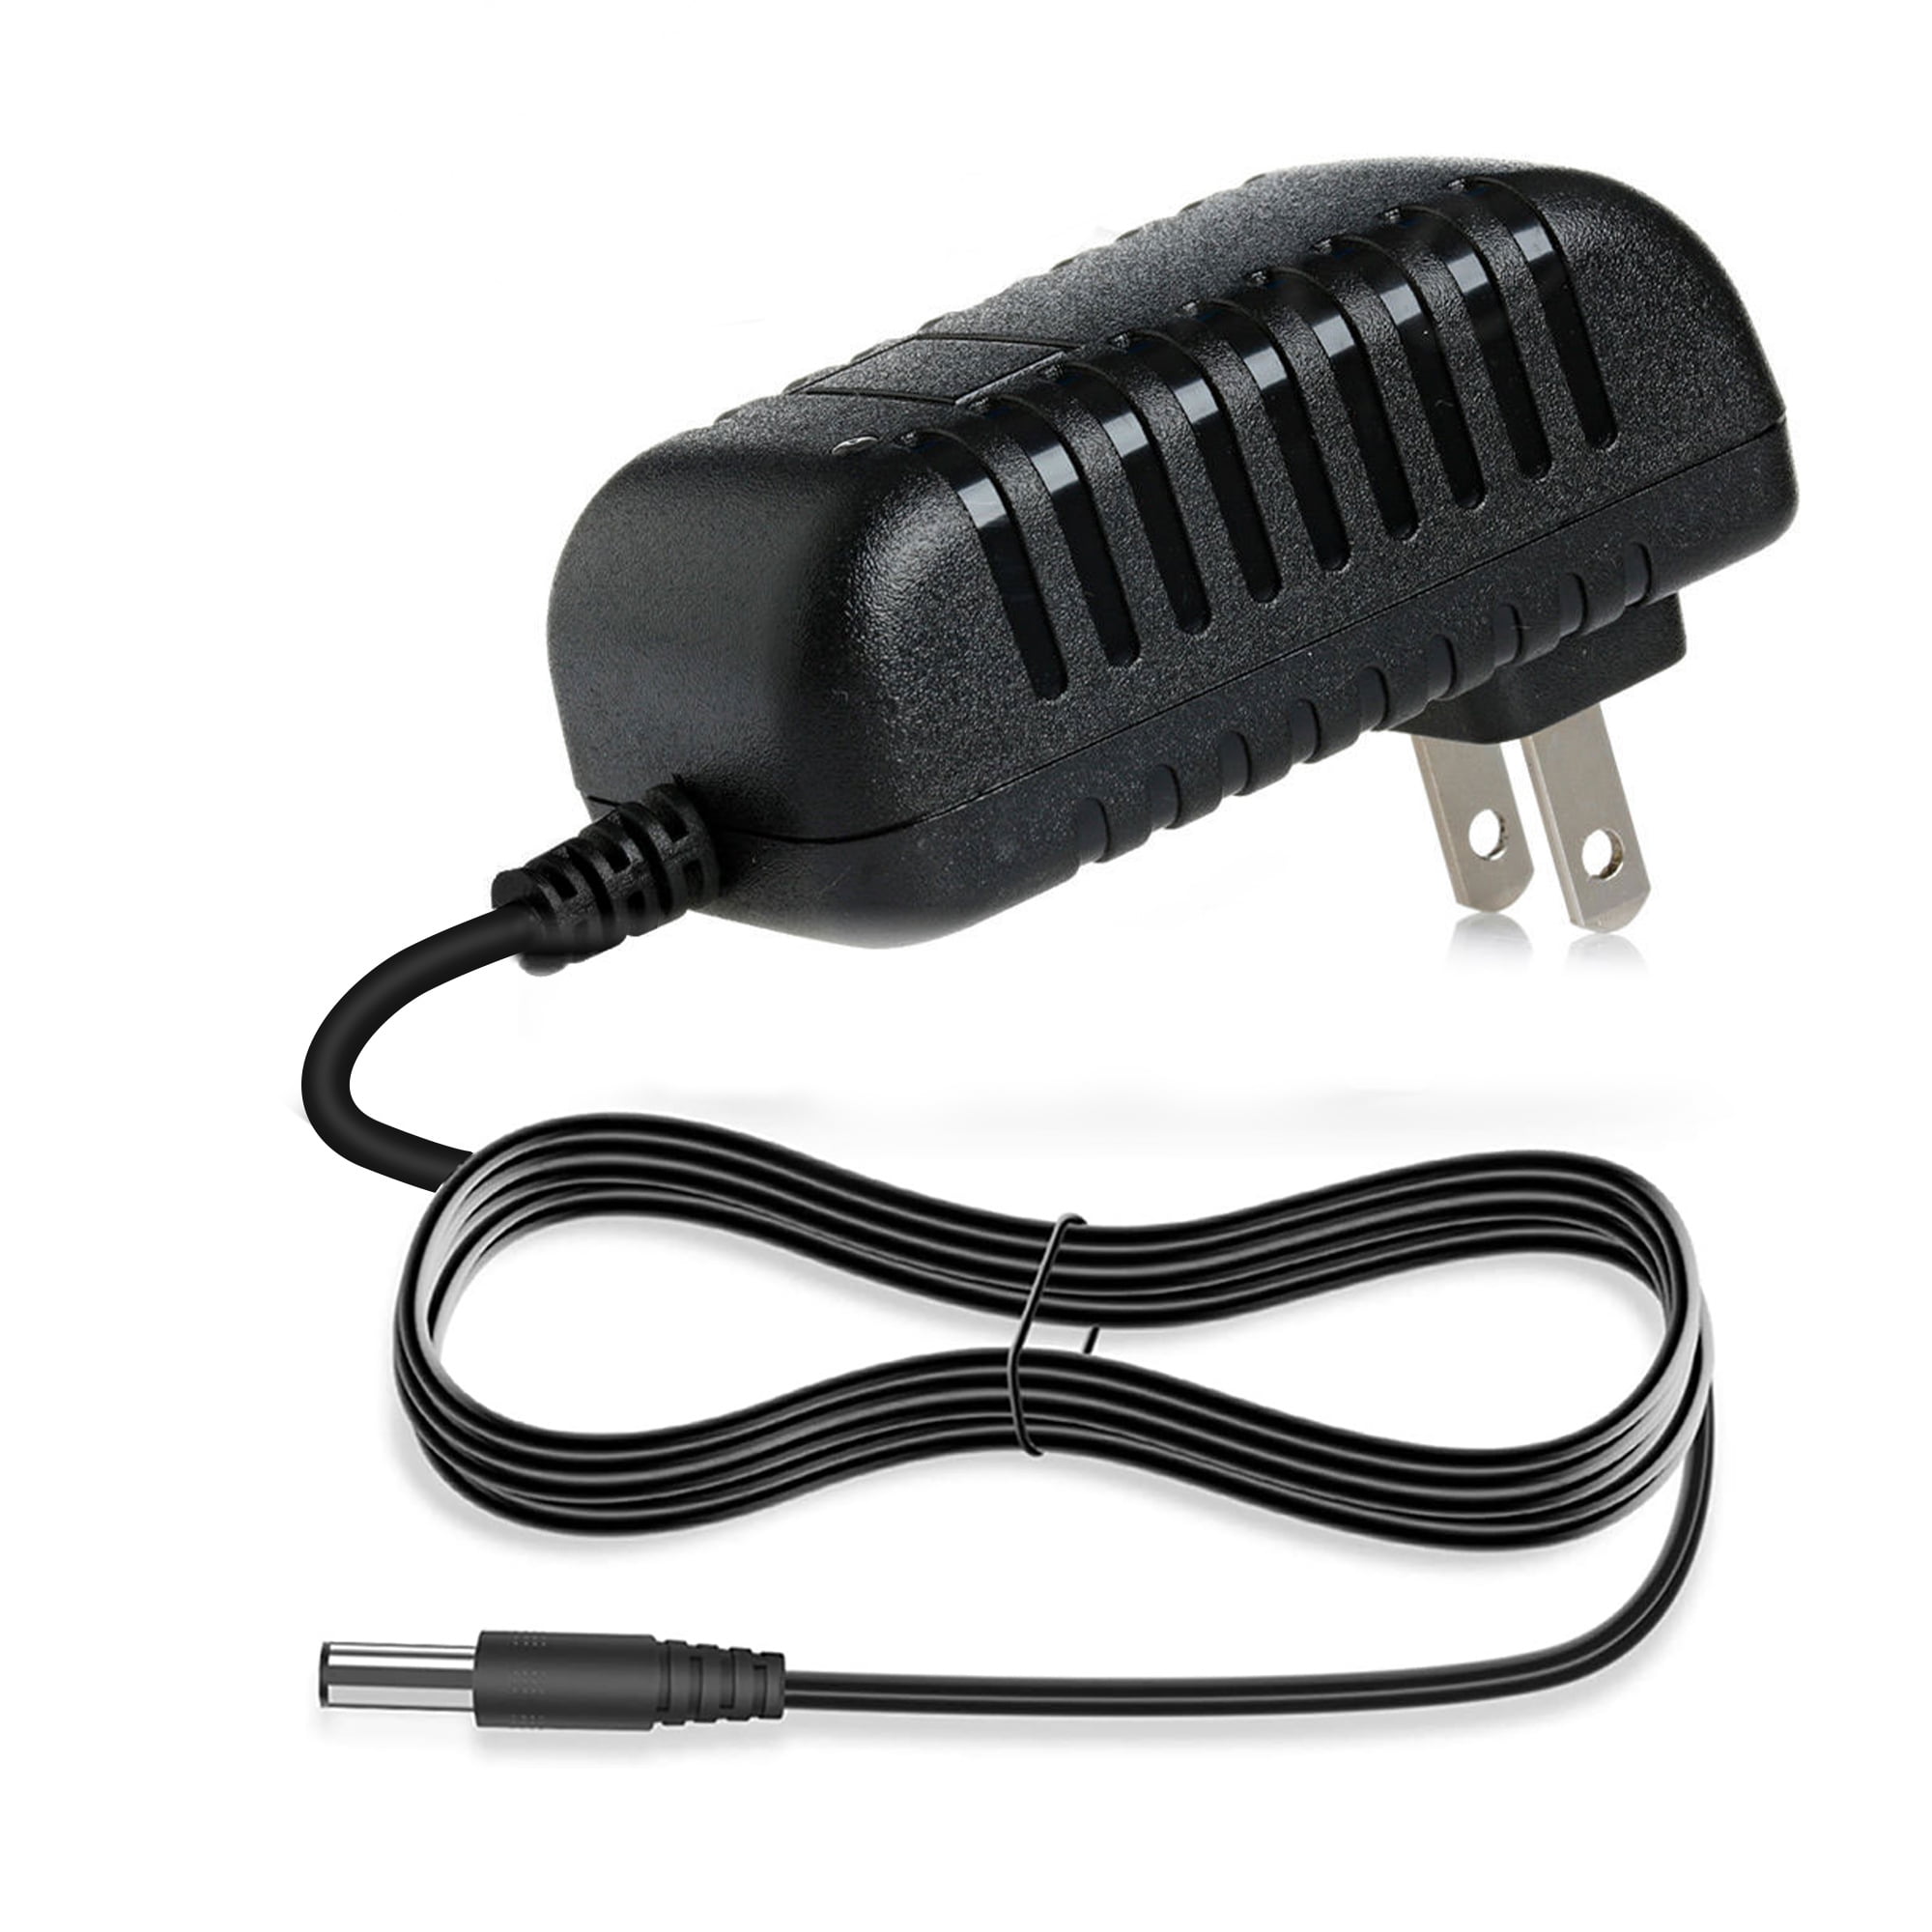 AC Adapter DC Power Supply Cord Charger For Sony SRS-A17 SRS-A27 Desktop Speaker 